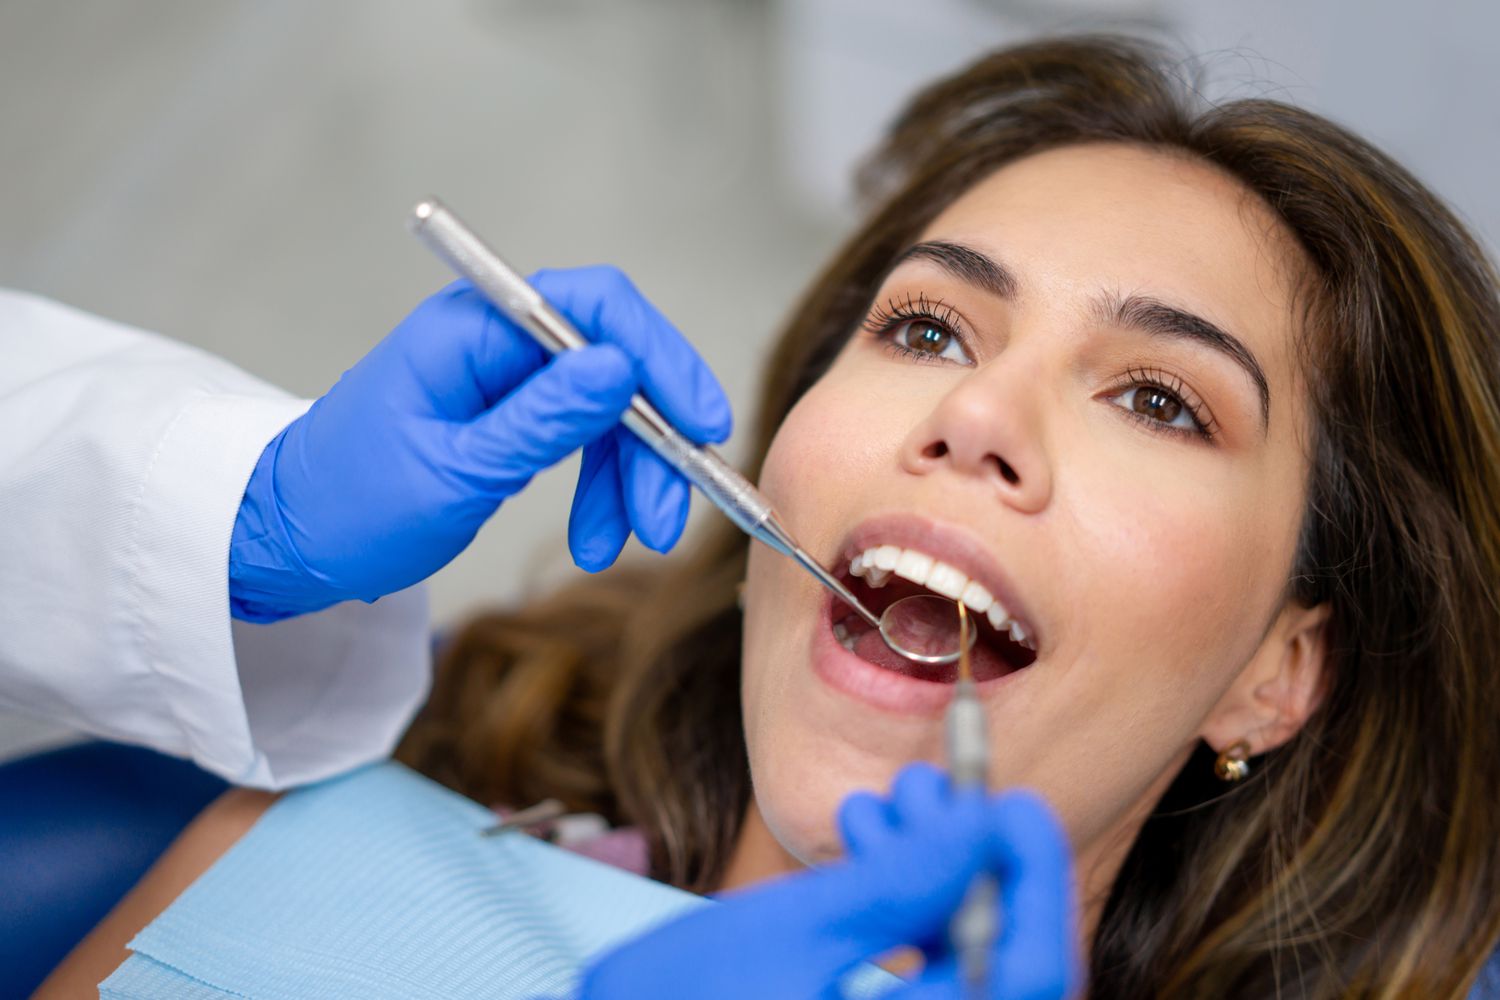 How Much Is Dental Cleaning With Insurance?